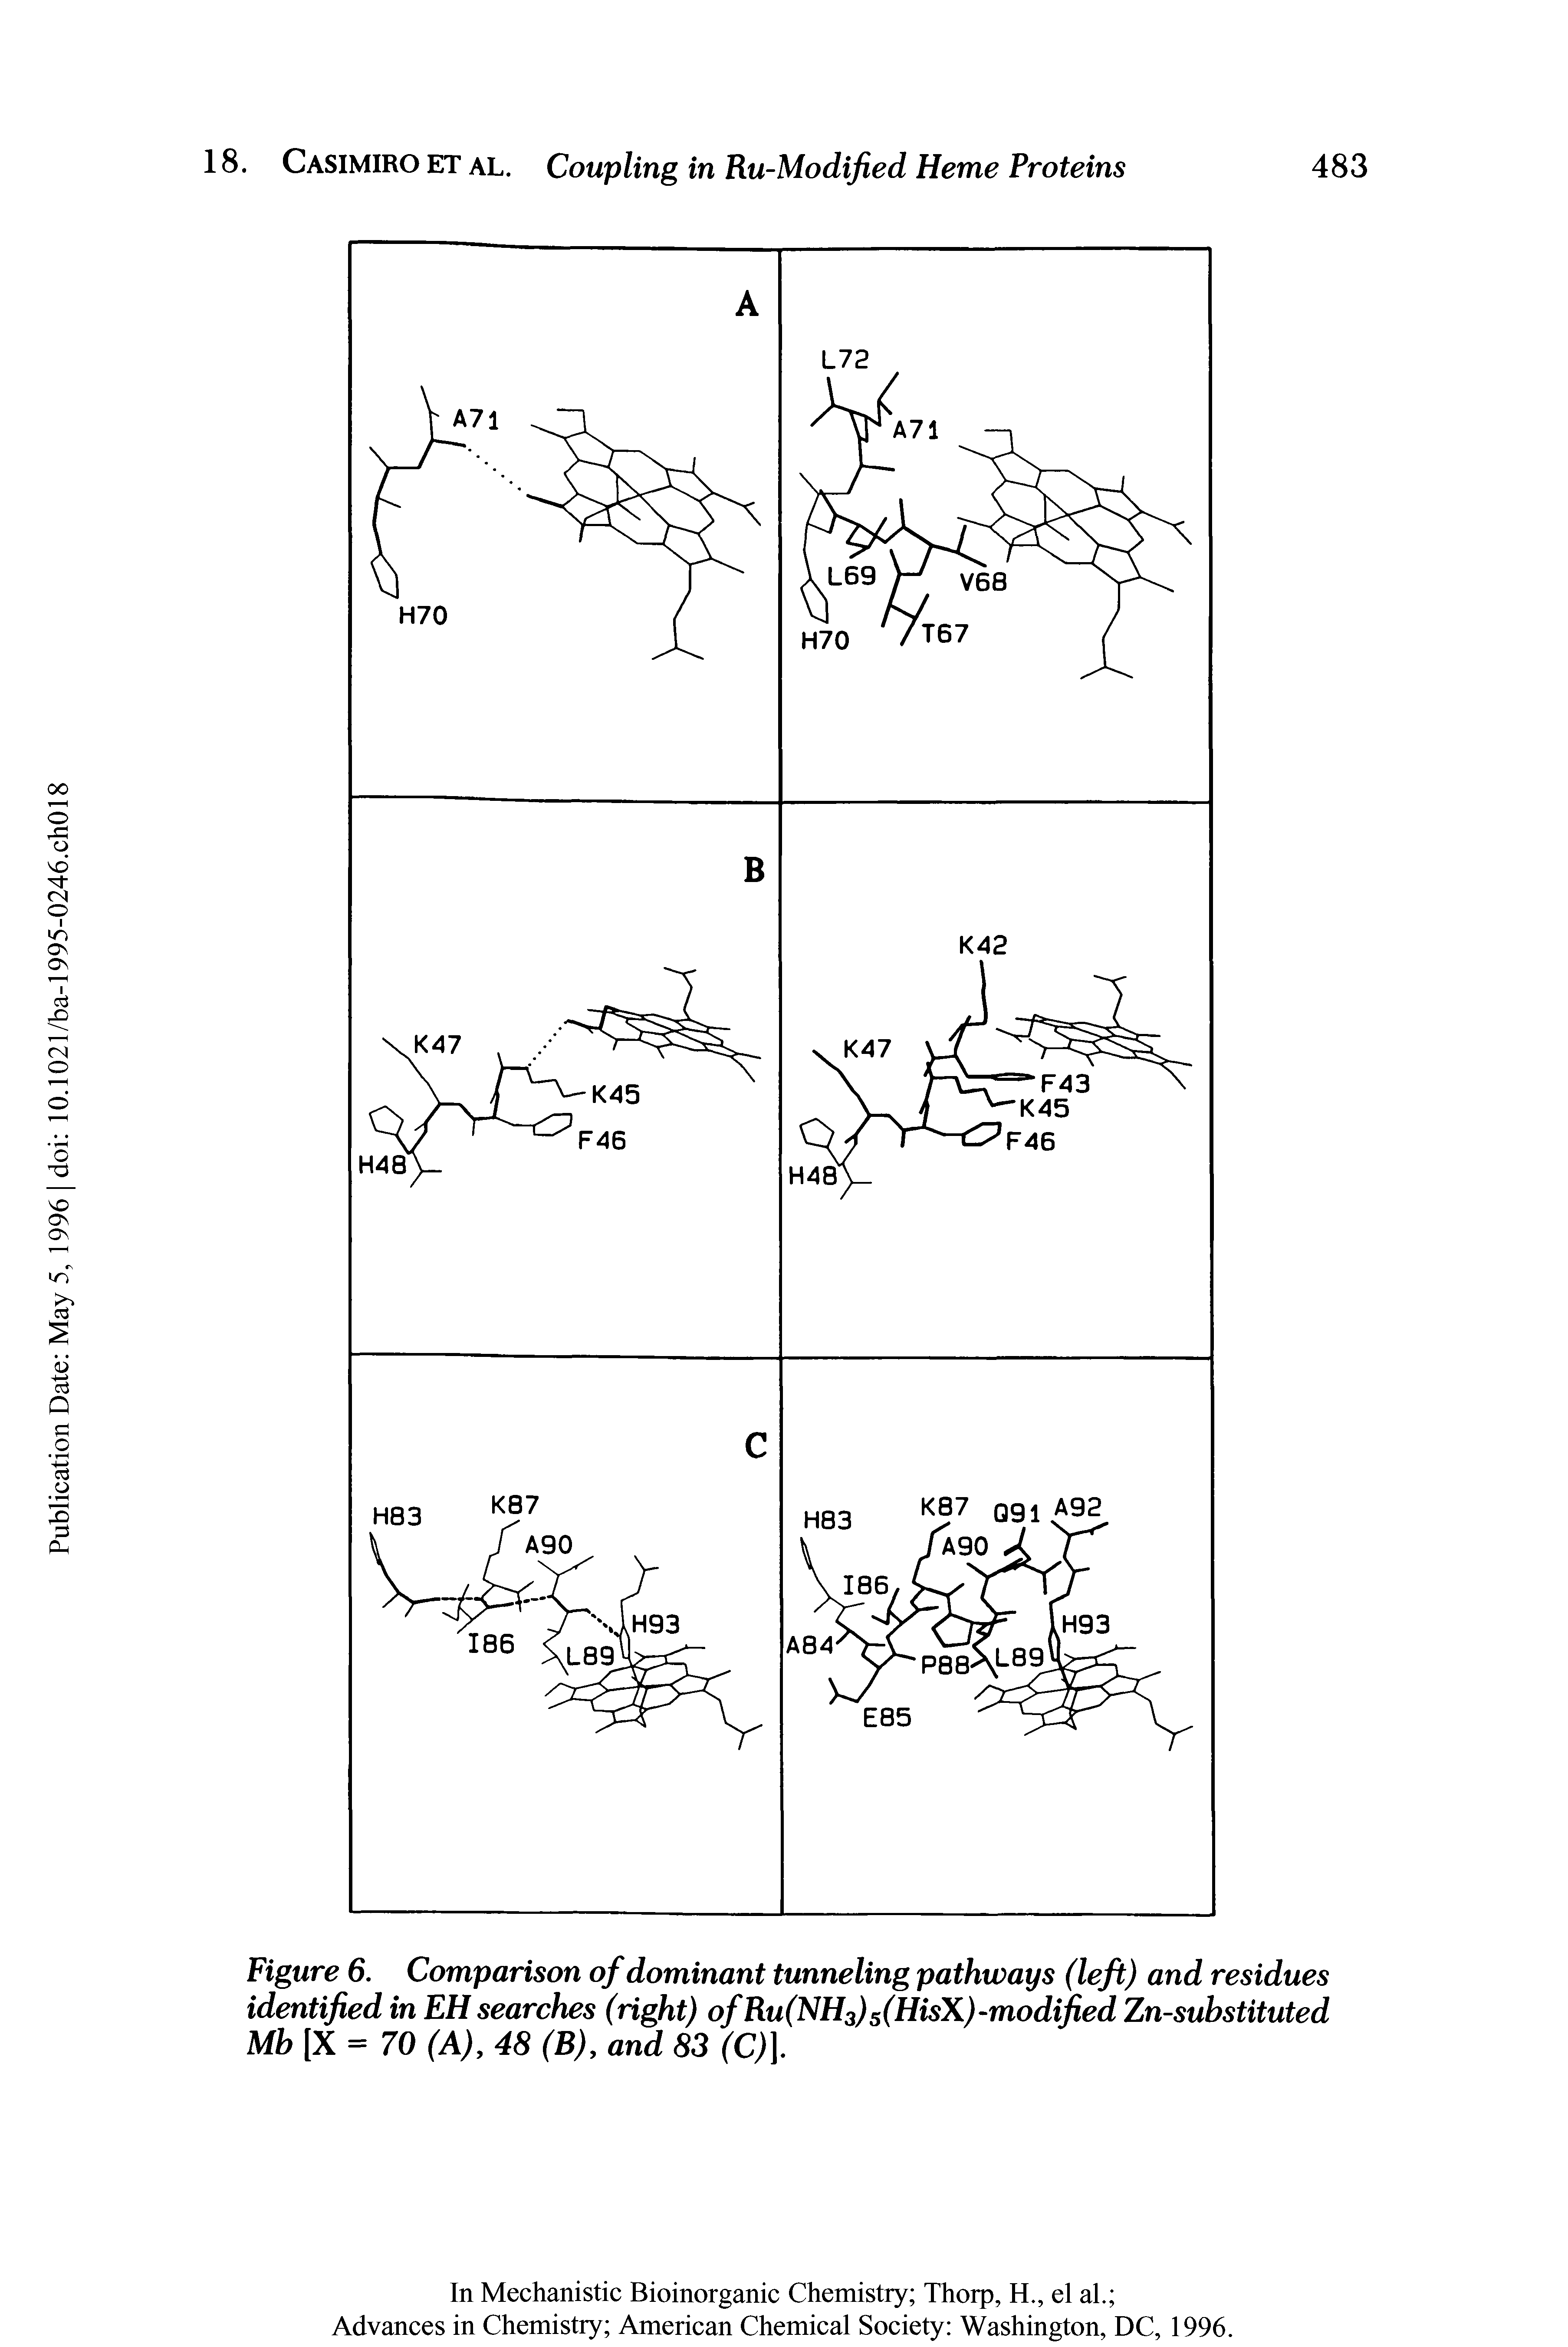 Figure 6. Comparison of dominant tunneling pathways (left) and residues identified in EH searches (right) of Ru(NH3)5(HisX)-modified Zn-substituted Mb [X = 70 (A), 48 (B), and 83 (C). ...